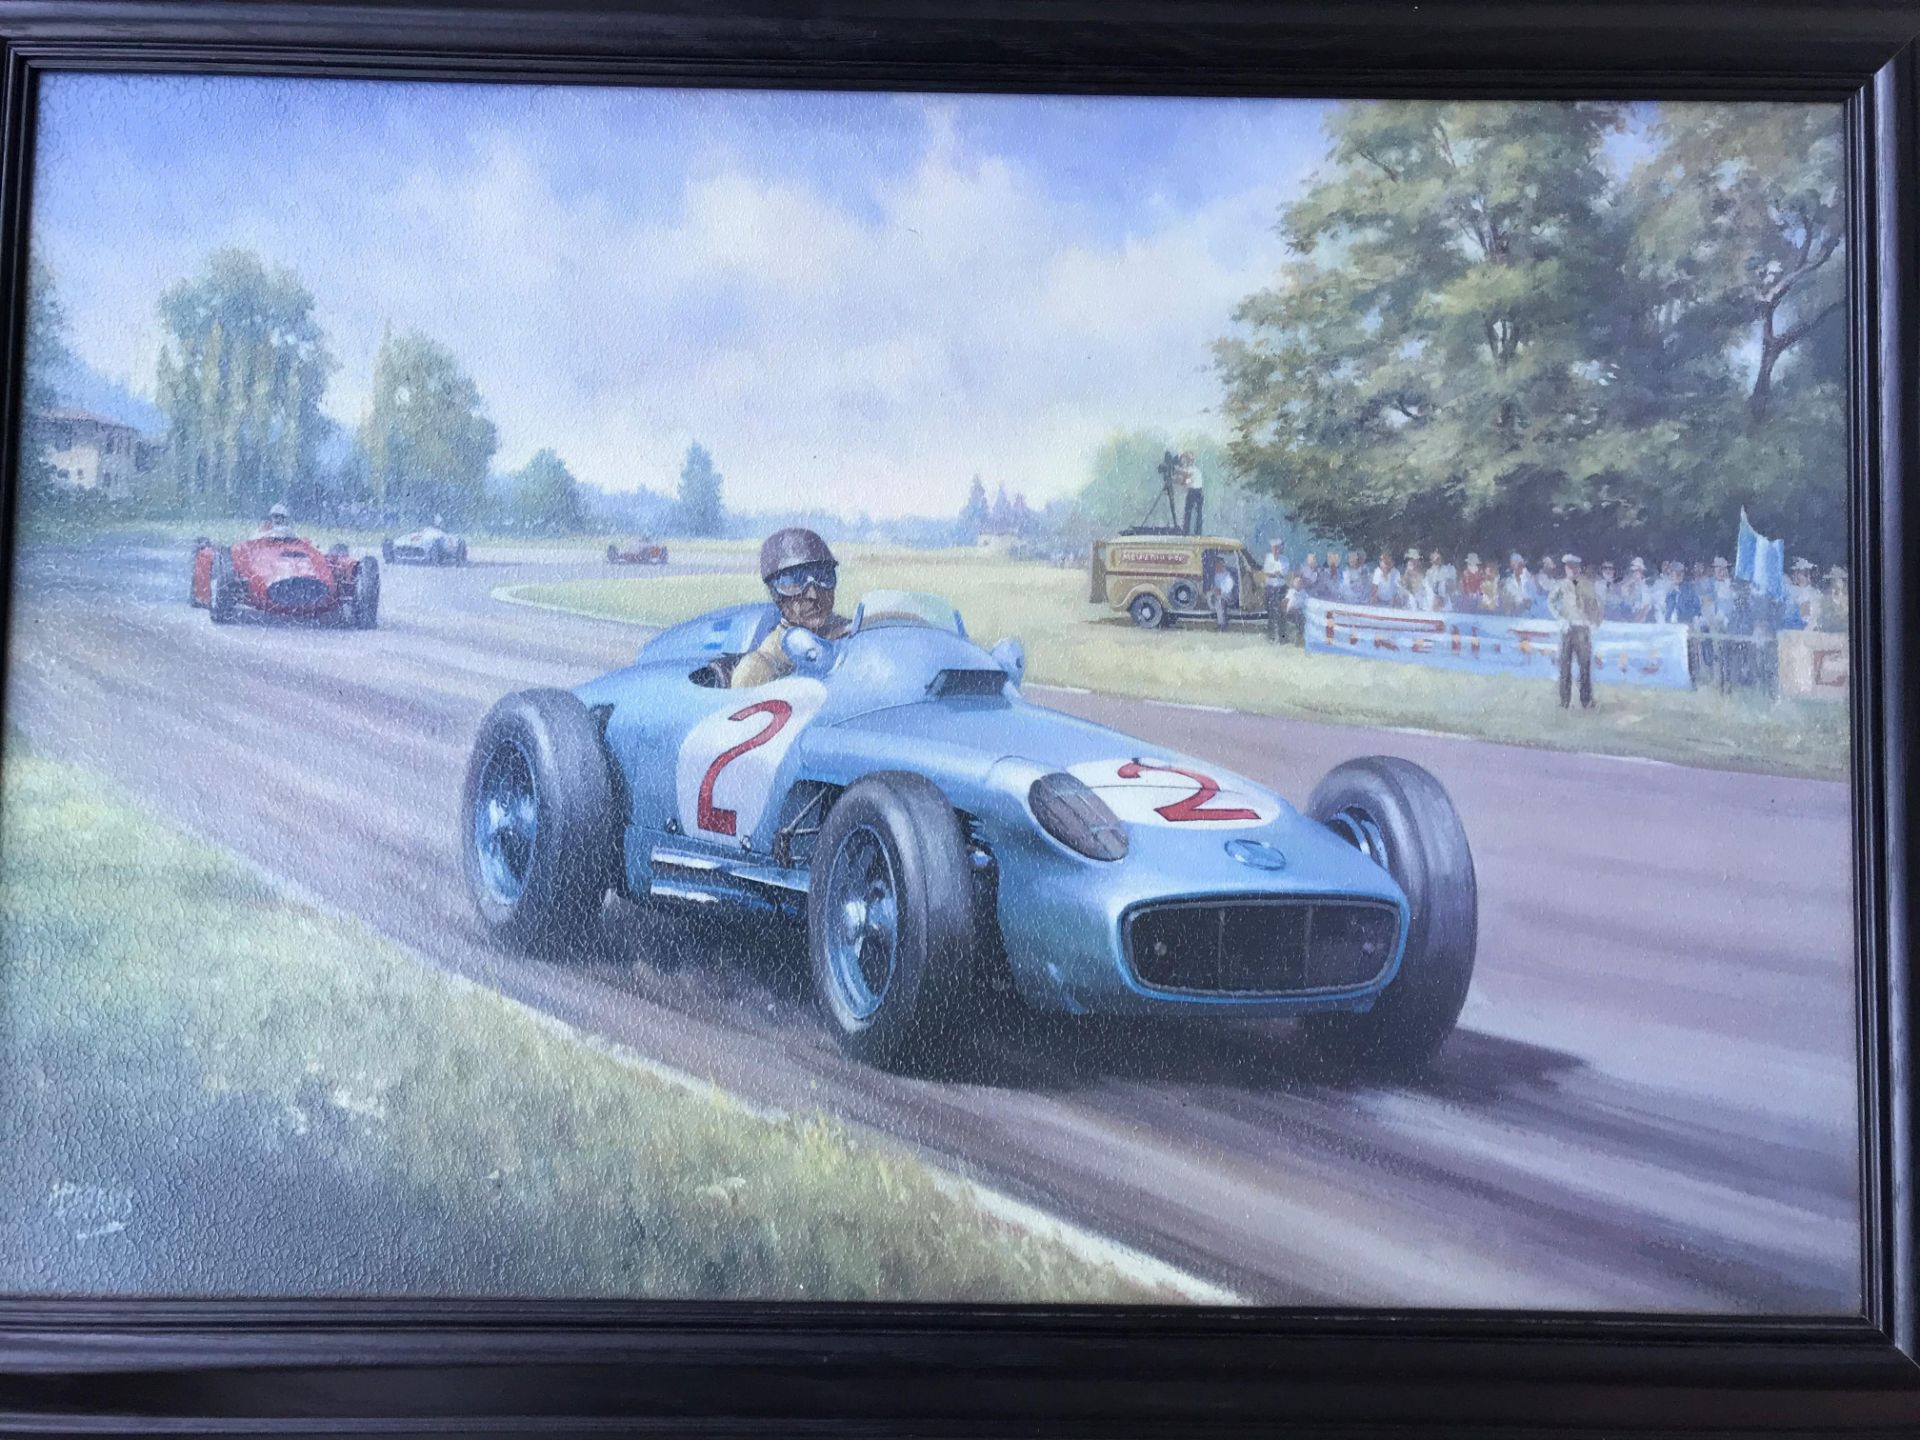 Print Of 1955 Argentine Grand Prix By Mike Jeffries - Image 3 of 3